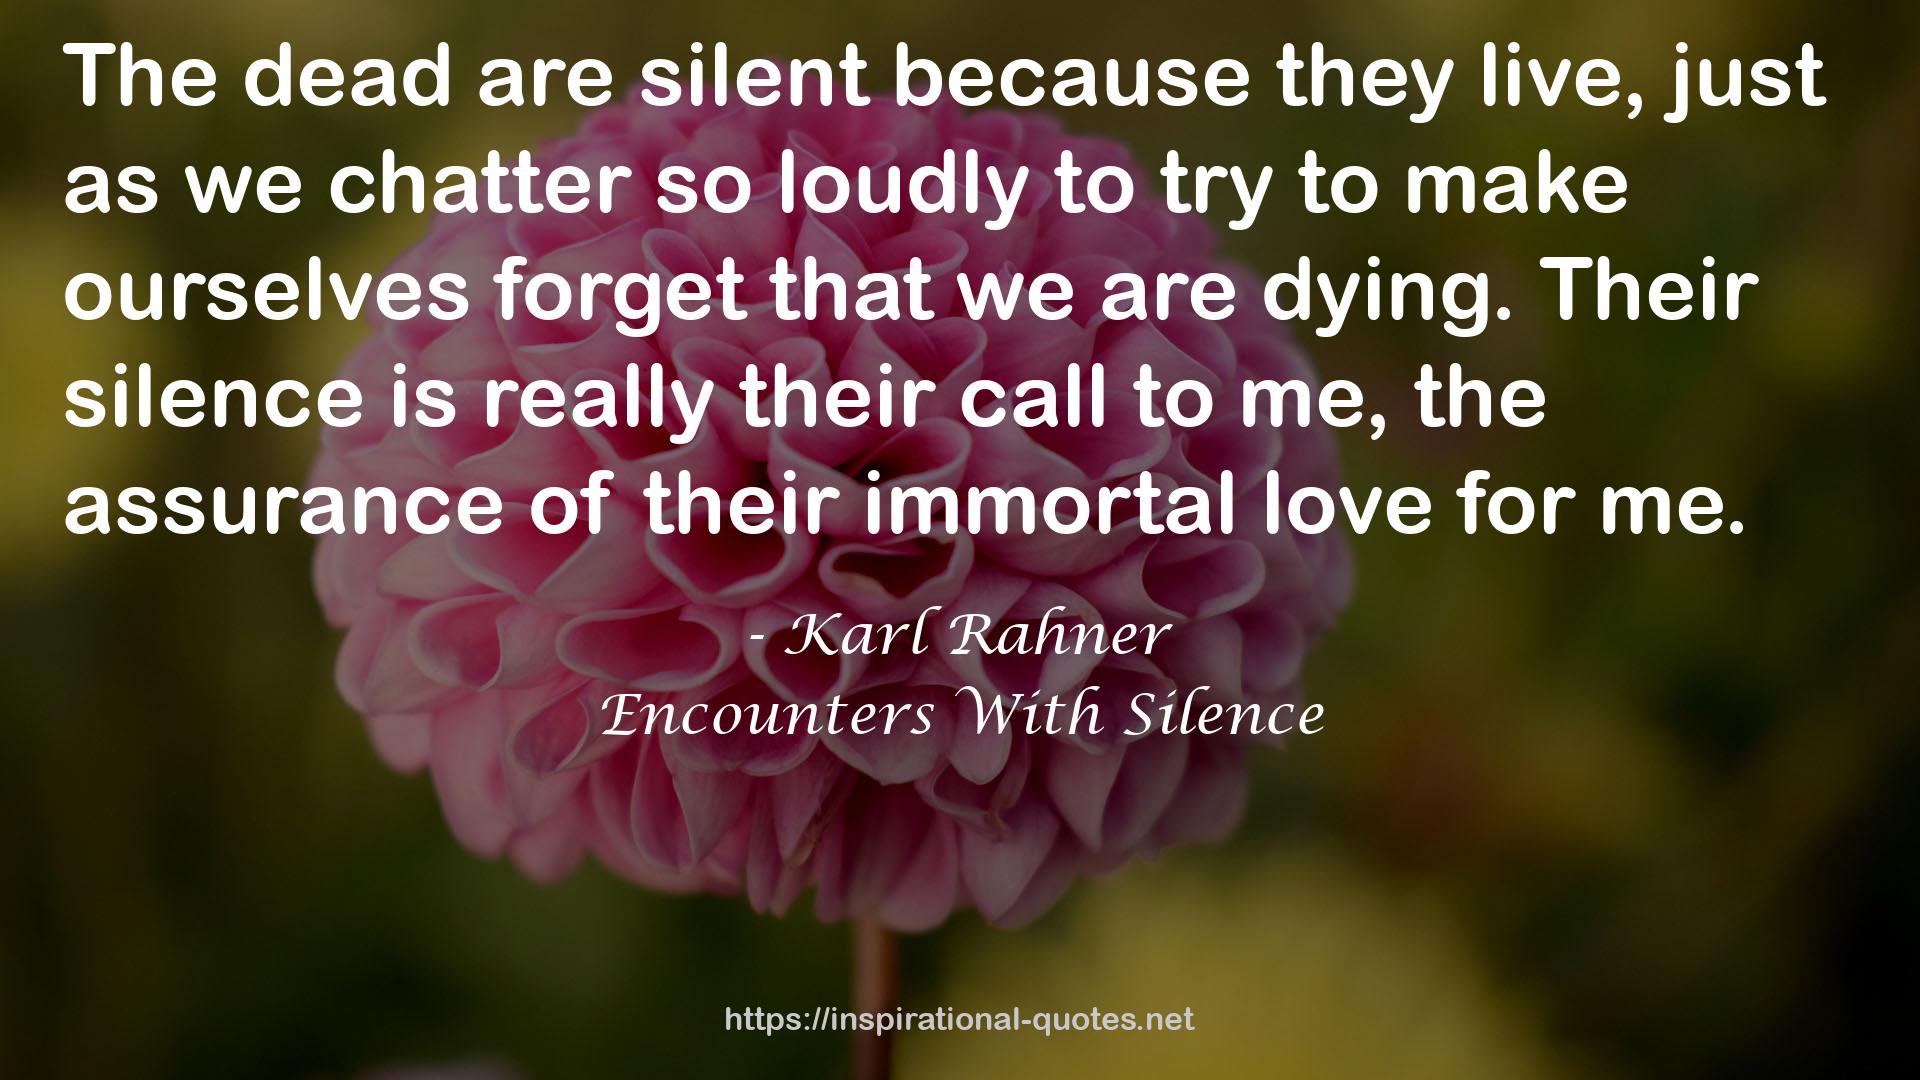 Encounters With Silence QUOTES